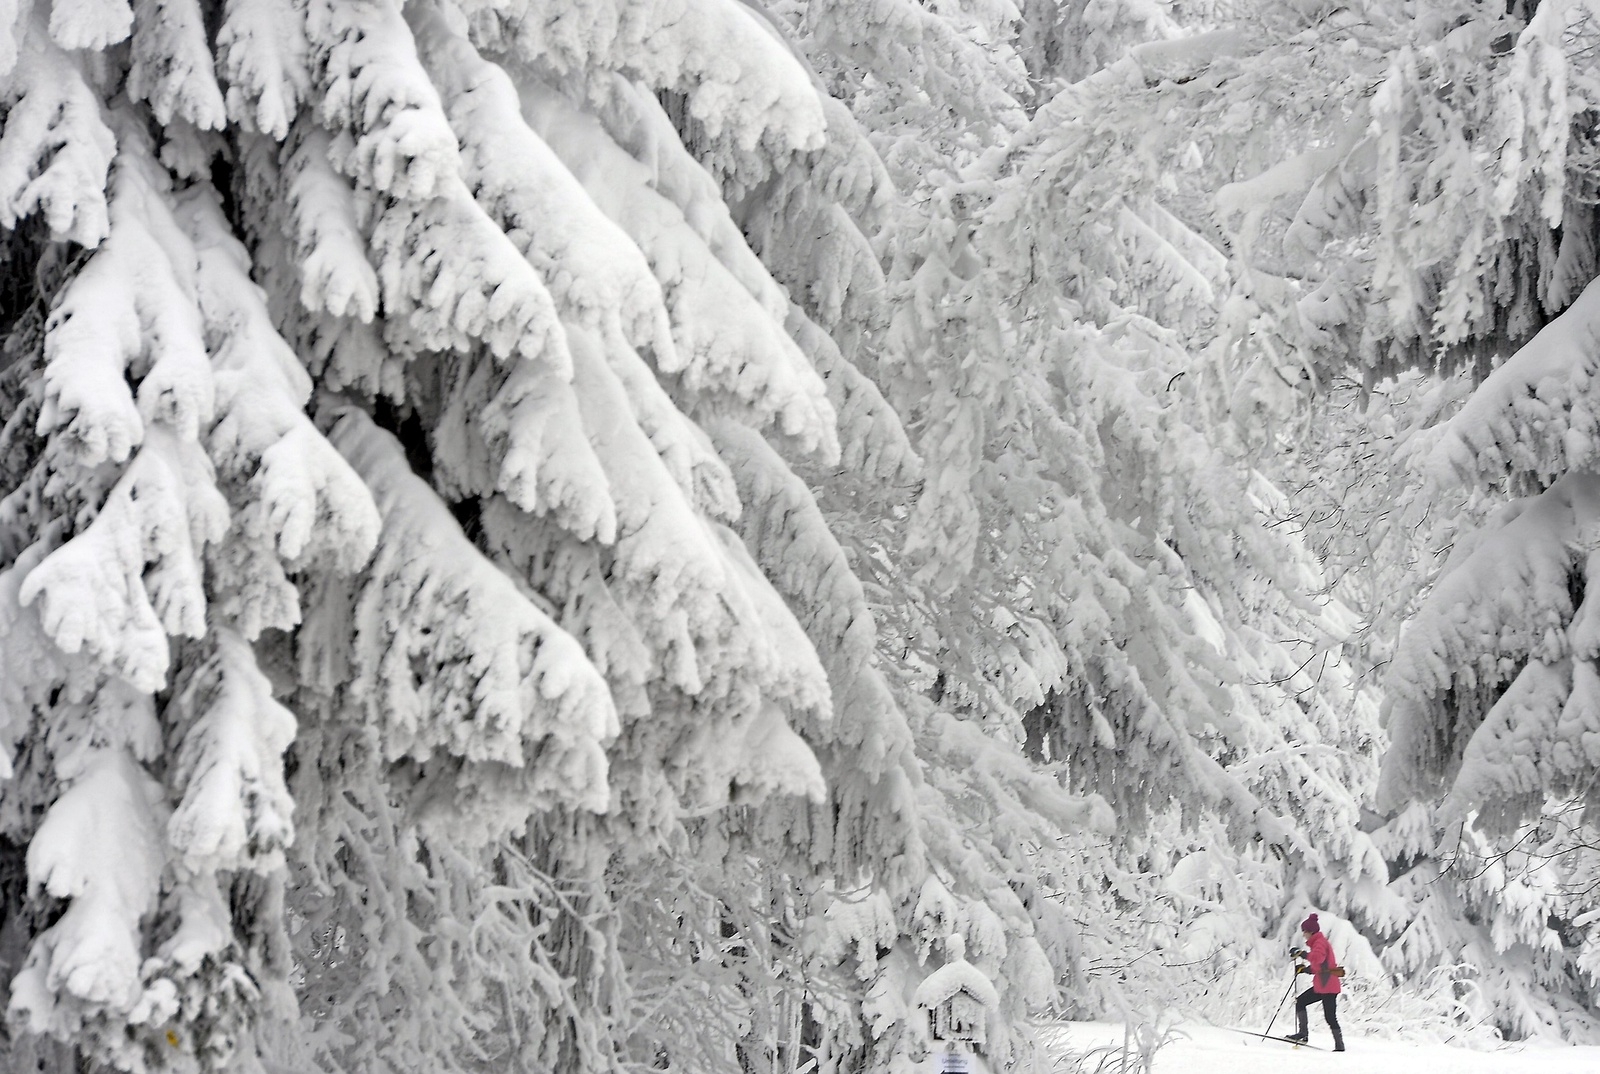 A skier passes snow covered trees in the Thuringian Forest near Oberhof, central Germany, on Tuesday, Jan. 22, 2013. The winter weather with temperatures around far below the freezing point will continue next days, according to forecasts. (AP Photo/Jens Meyer)